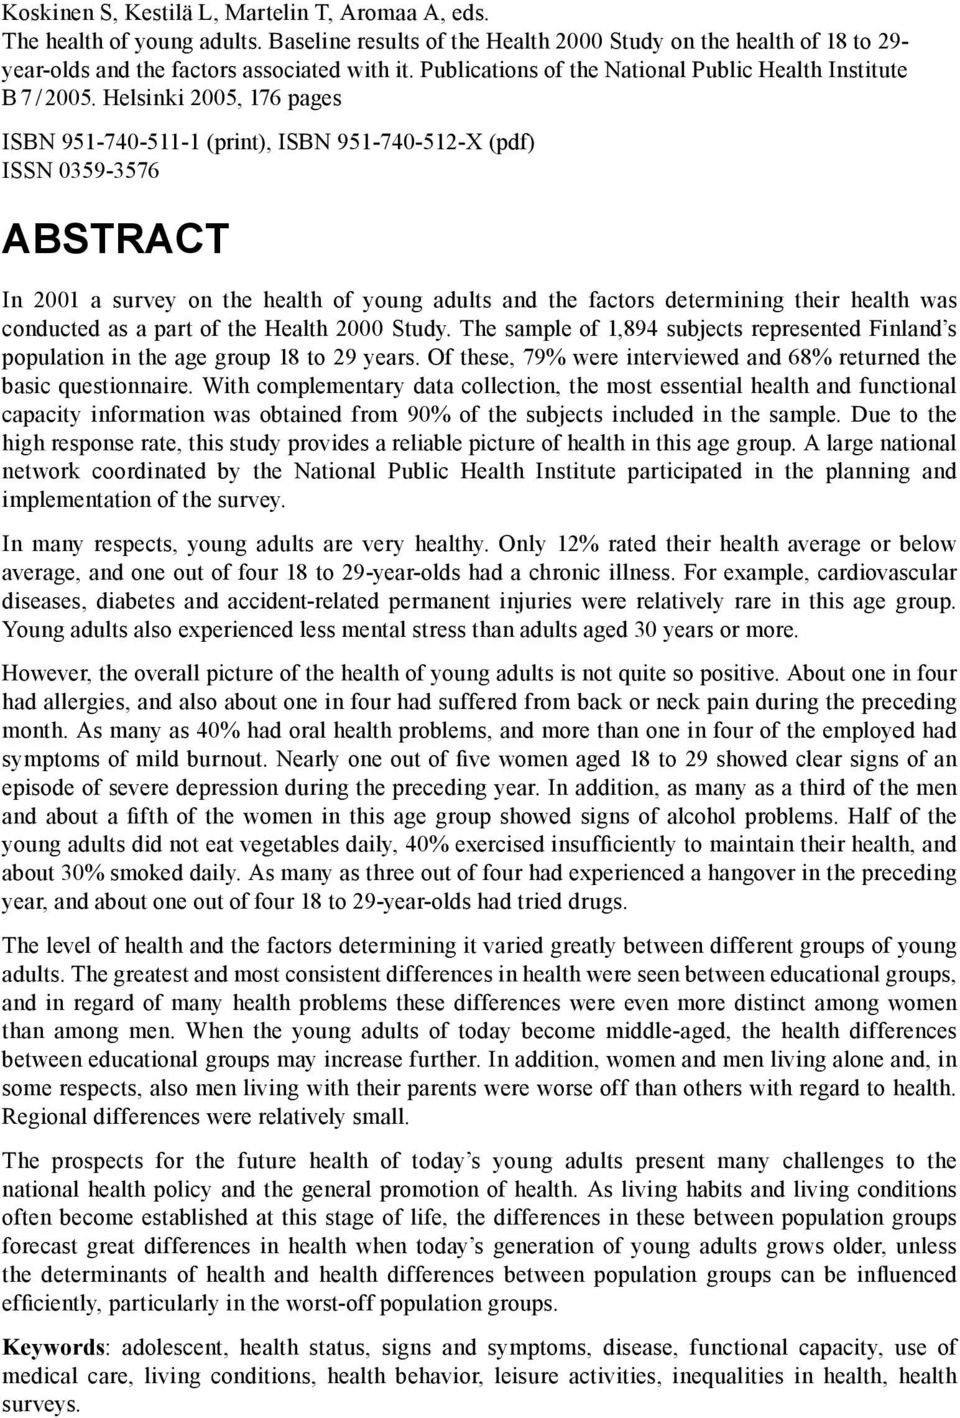 Helsinki 2005, 76 pages ISBN 95-740-5- (print), ISBN 95-740-52-X (pdf) ISSN 0359-3576 ABSTRACT In 200 a survey on the health of young adults and the factors determining their health was conducted as